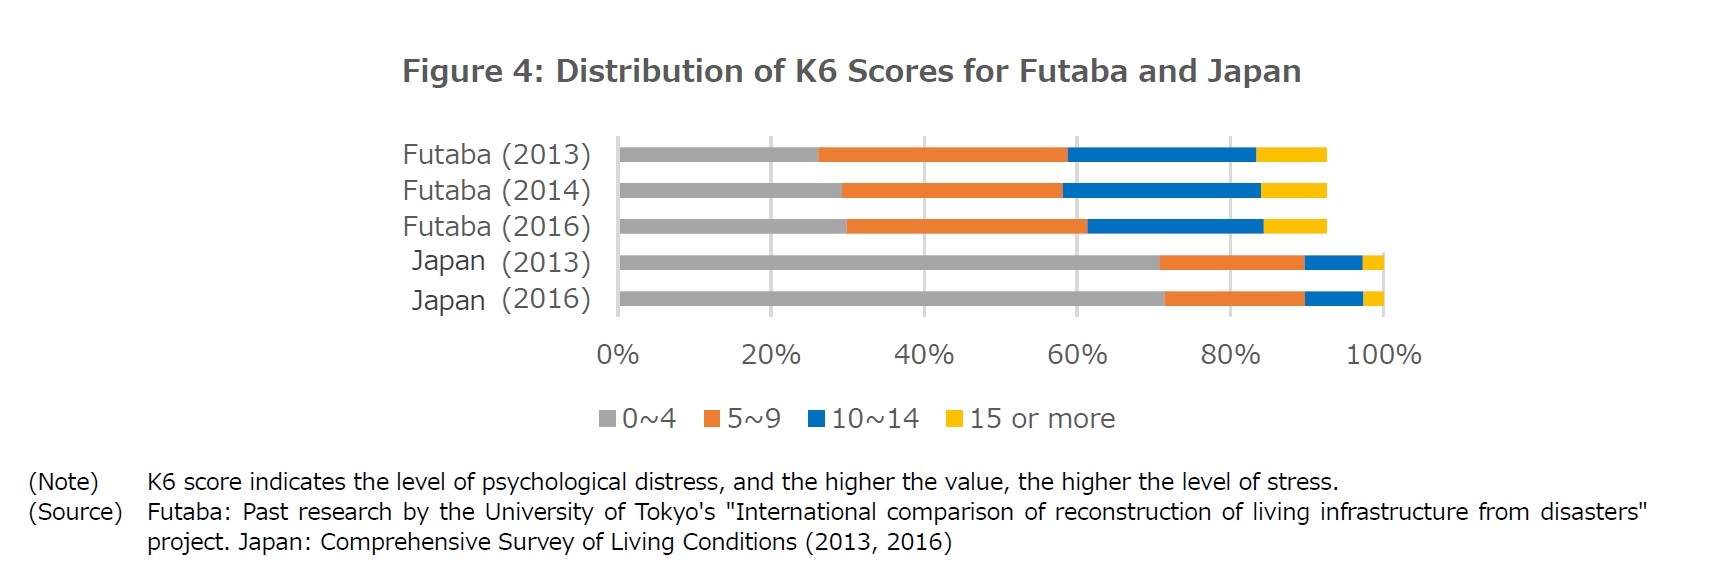 Figure 4: Distribution of K6 Scores for Futaba and Japan